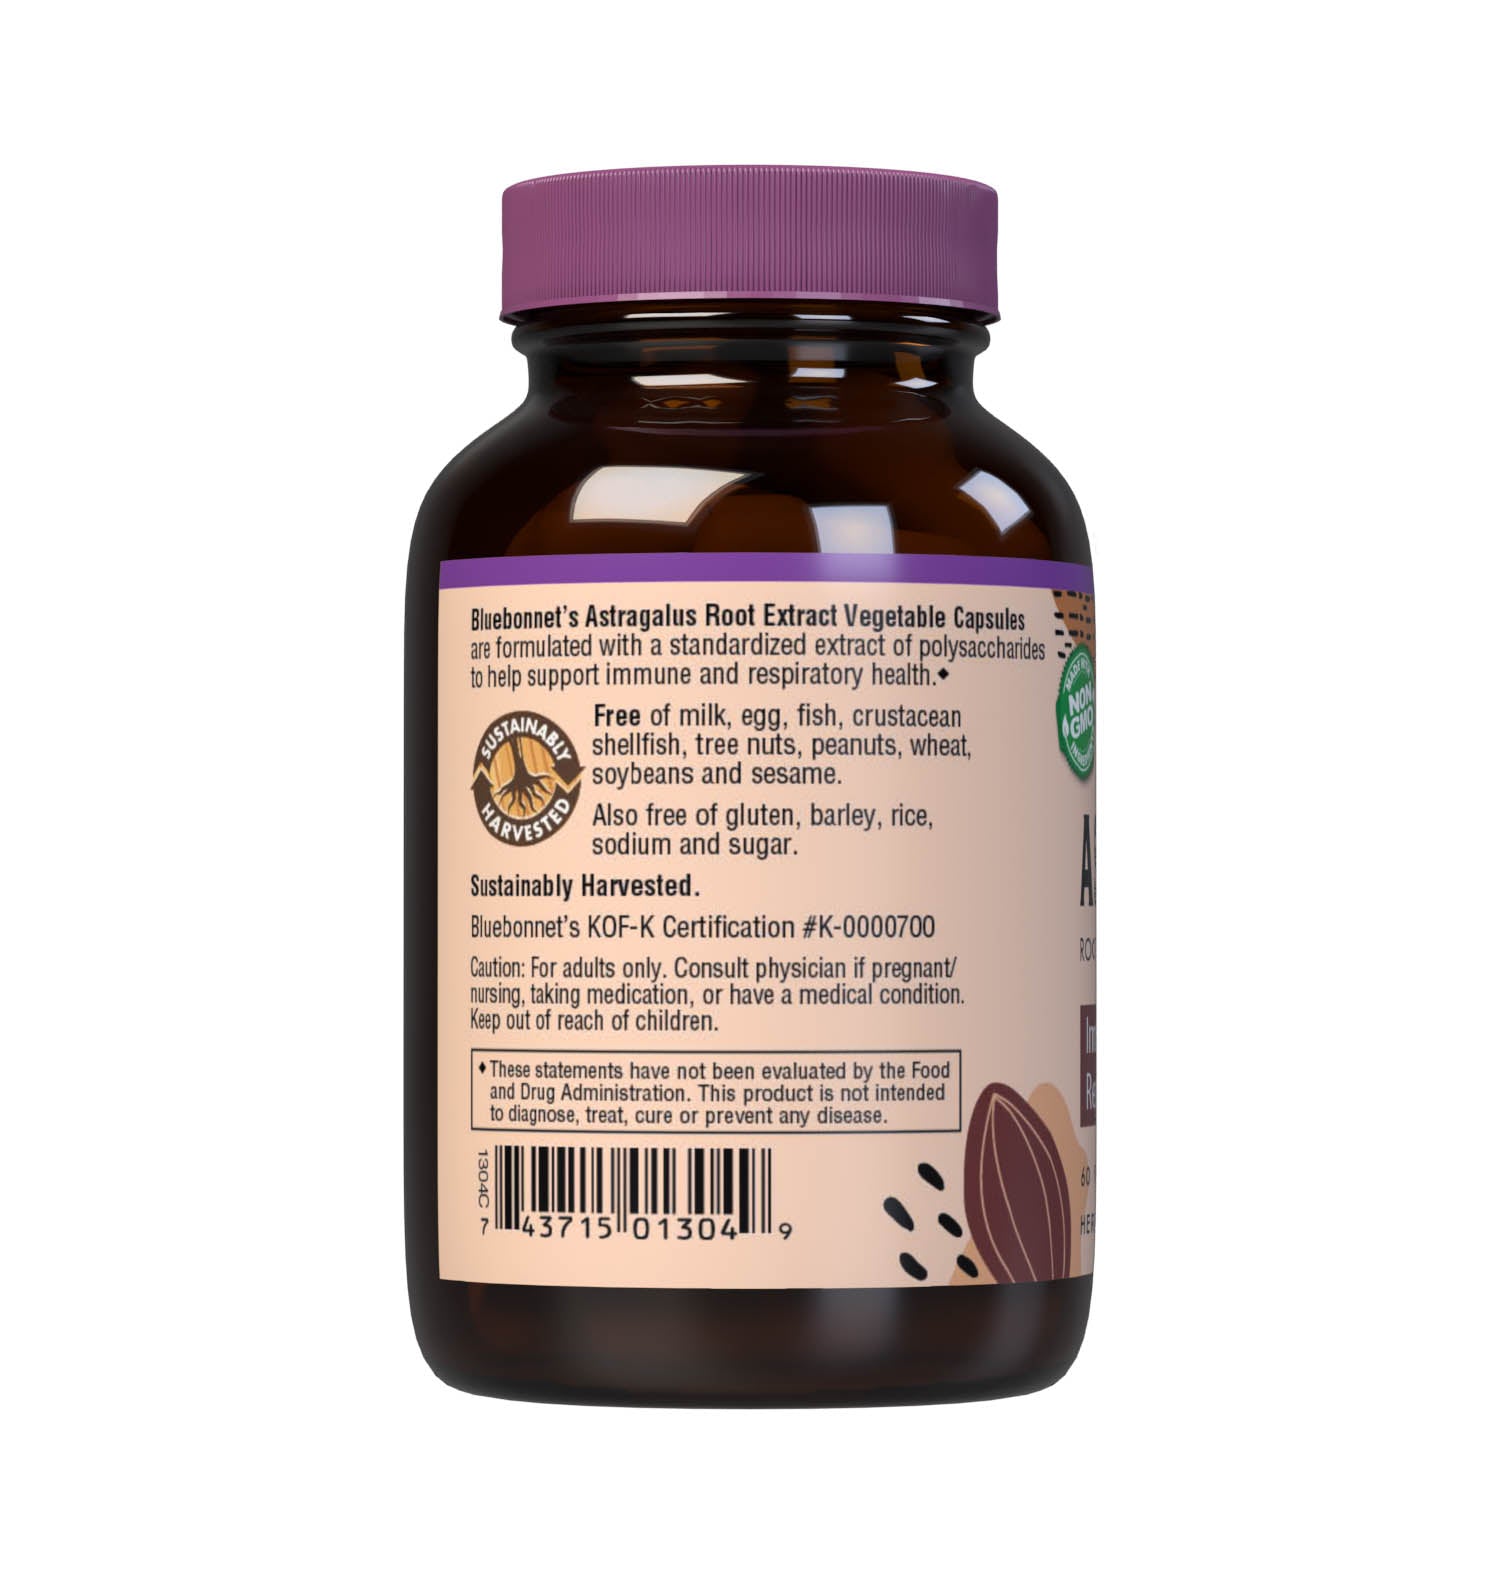 Bluebonnet’s Astragalus Root Extract 60 Vegetable Capsules provide a standardized extract of polysaccharides, the most researched active constituents found in astragalus root to support immune health. A clean and gentle water-based extraction method is employed to capture and preserve astragalus’ most valuable components. Description panel. #size_60 count